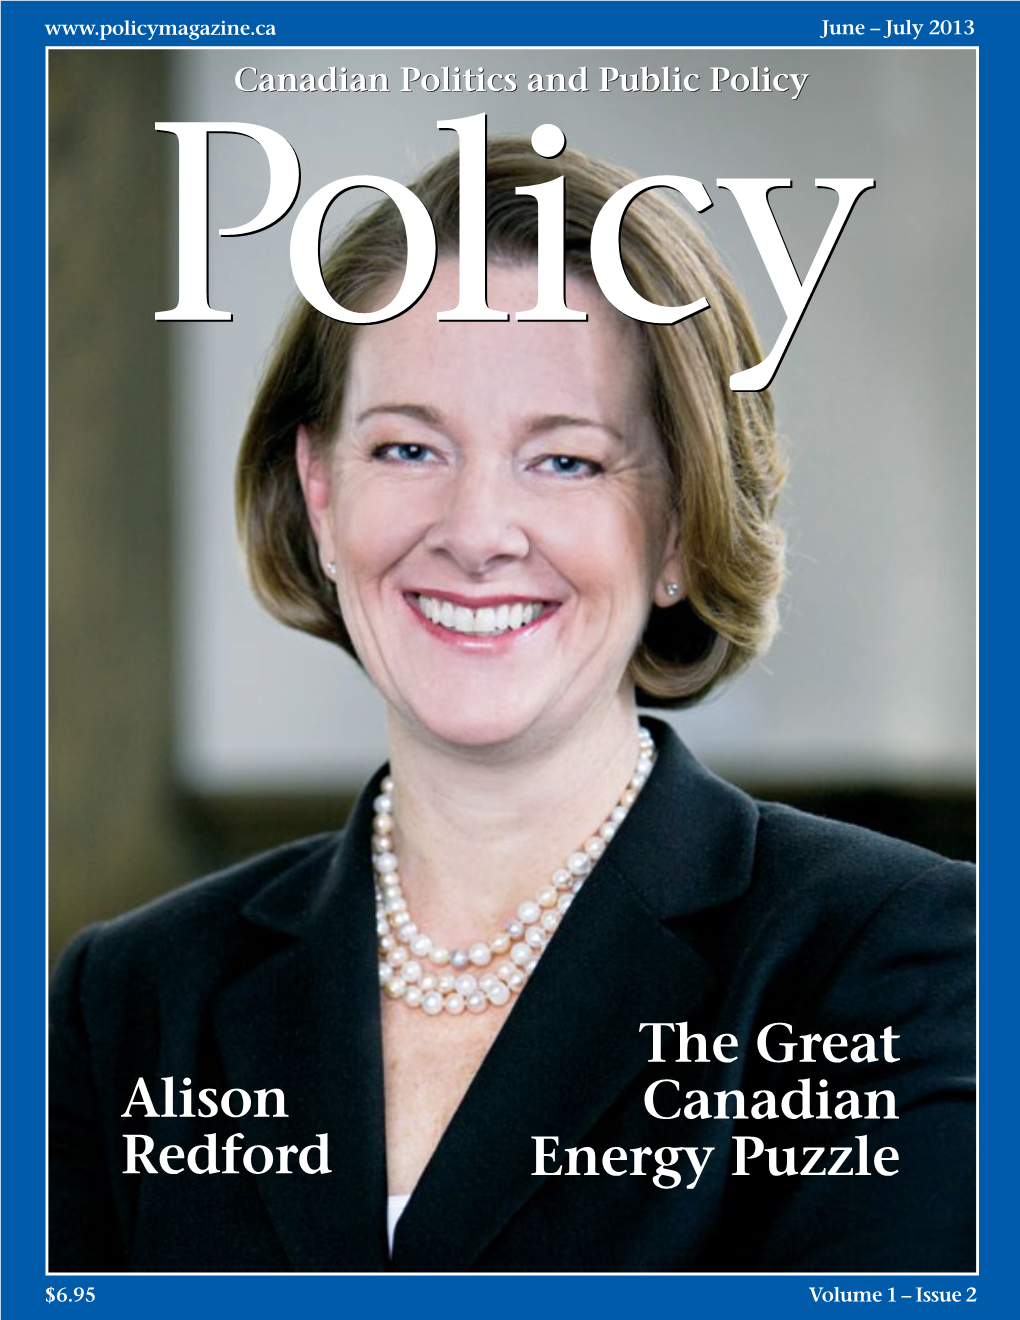 Alison Redford the Great Canadian Energy Puzzle